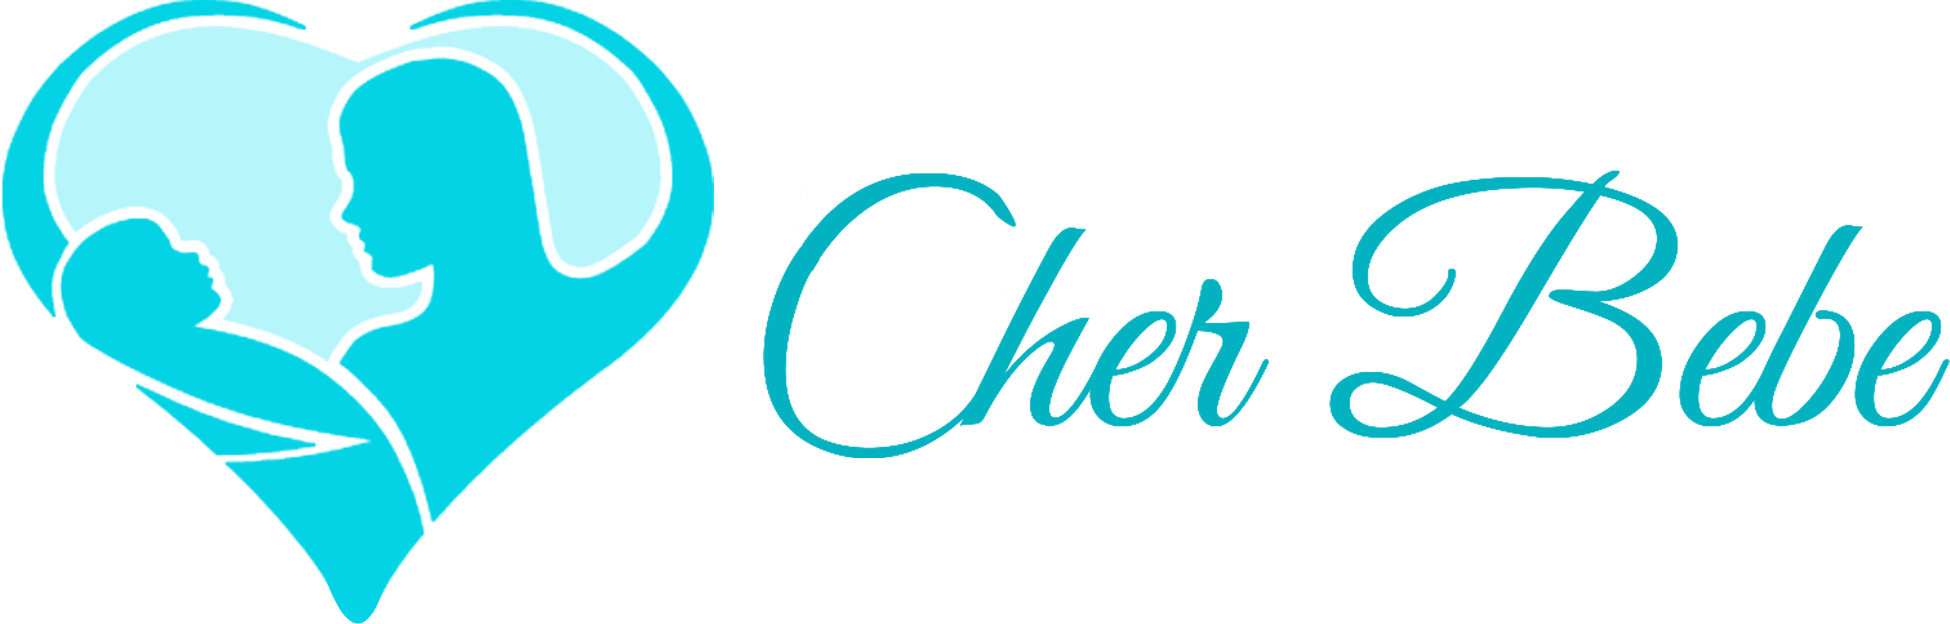 Cher Bebe Official Store